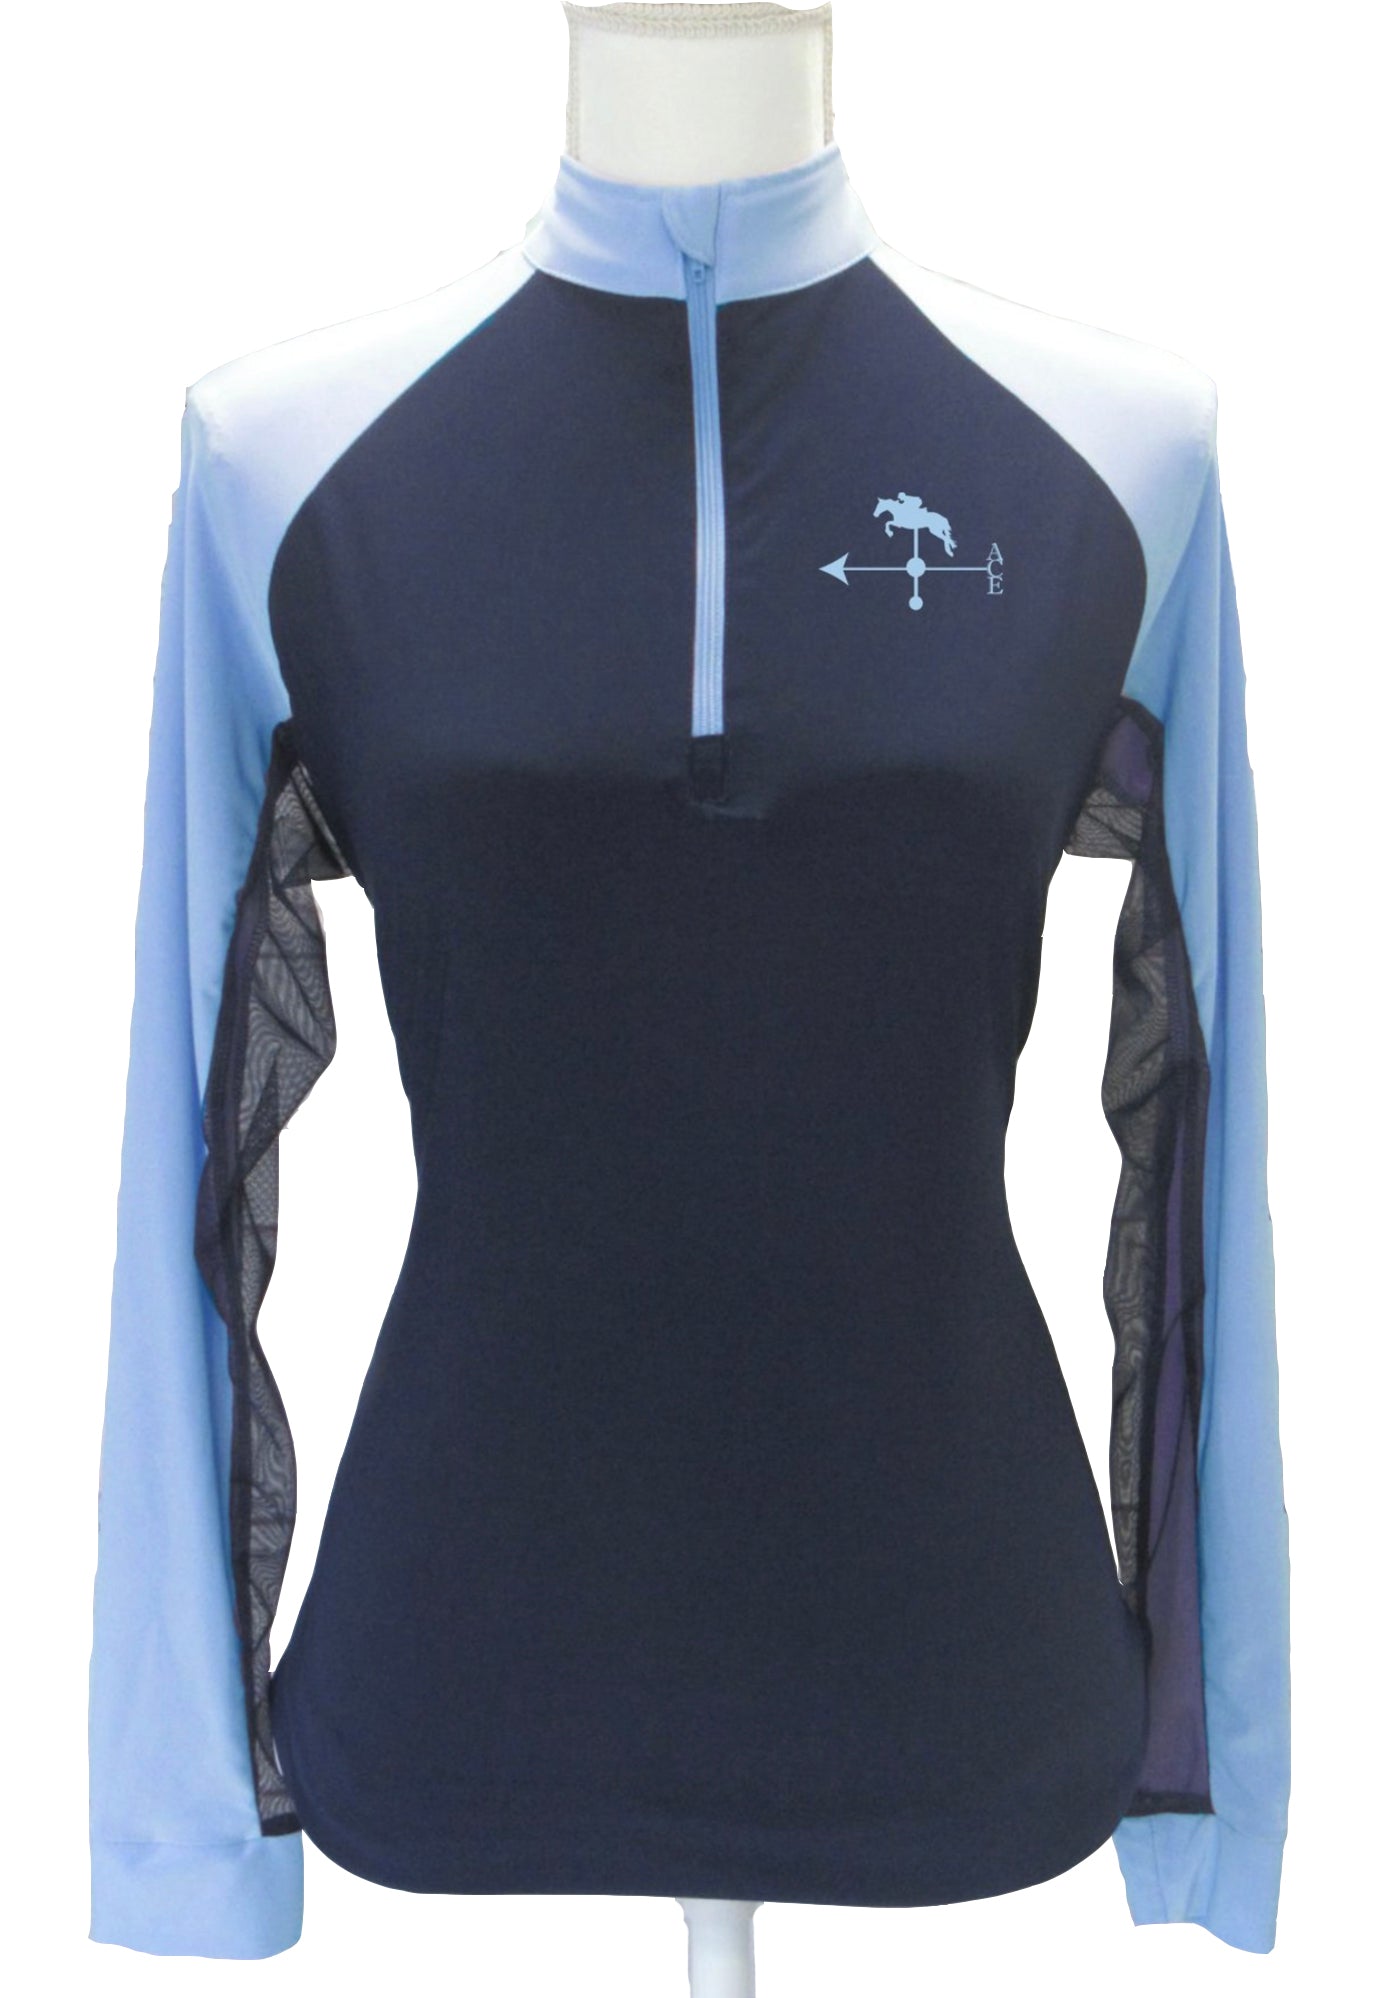 ACE Equestrian Adult Custom Sun Shirt - Navy with Baby Blue Accents